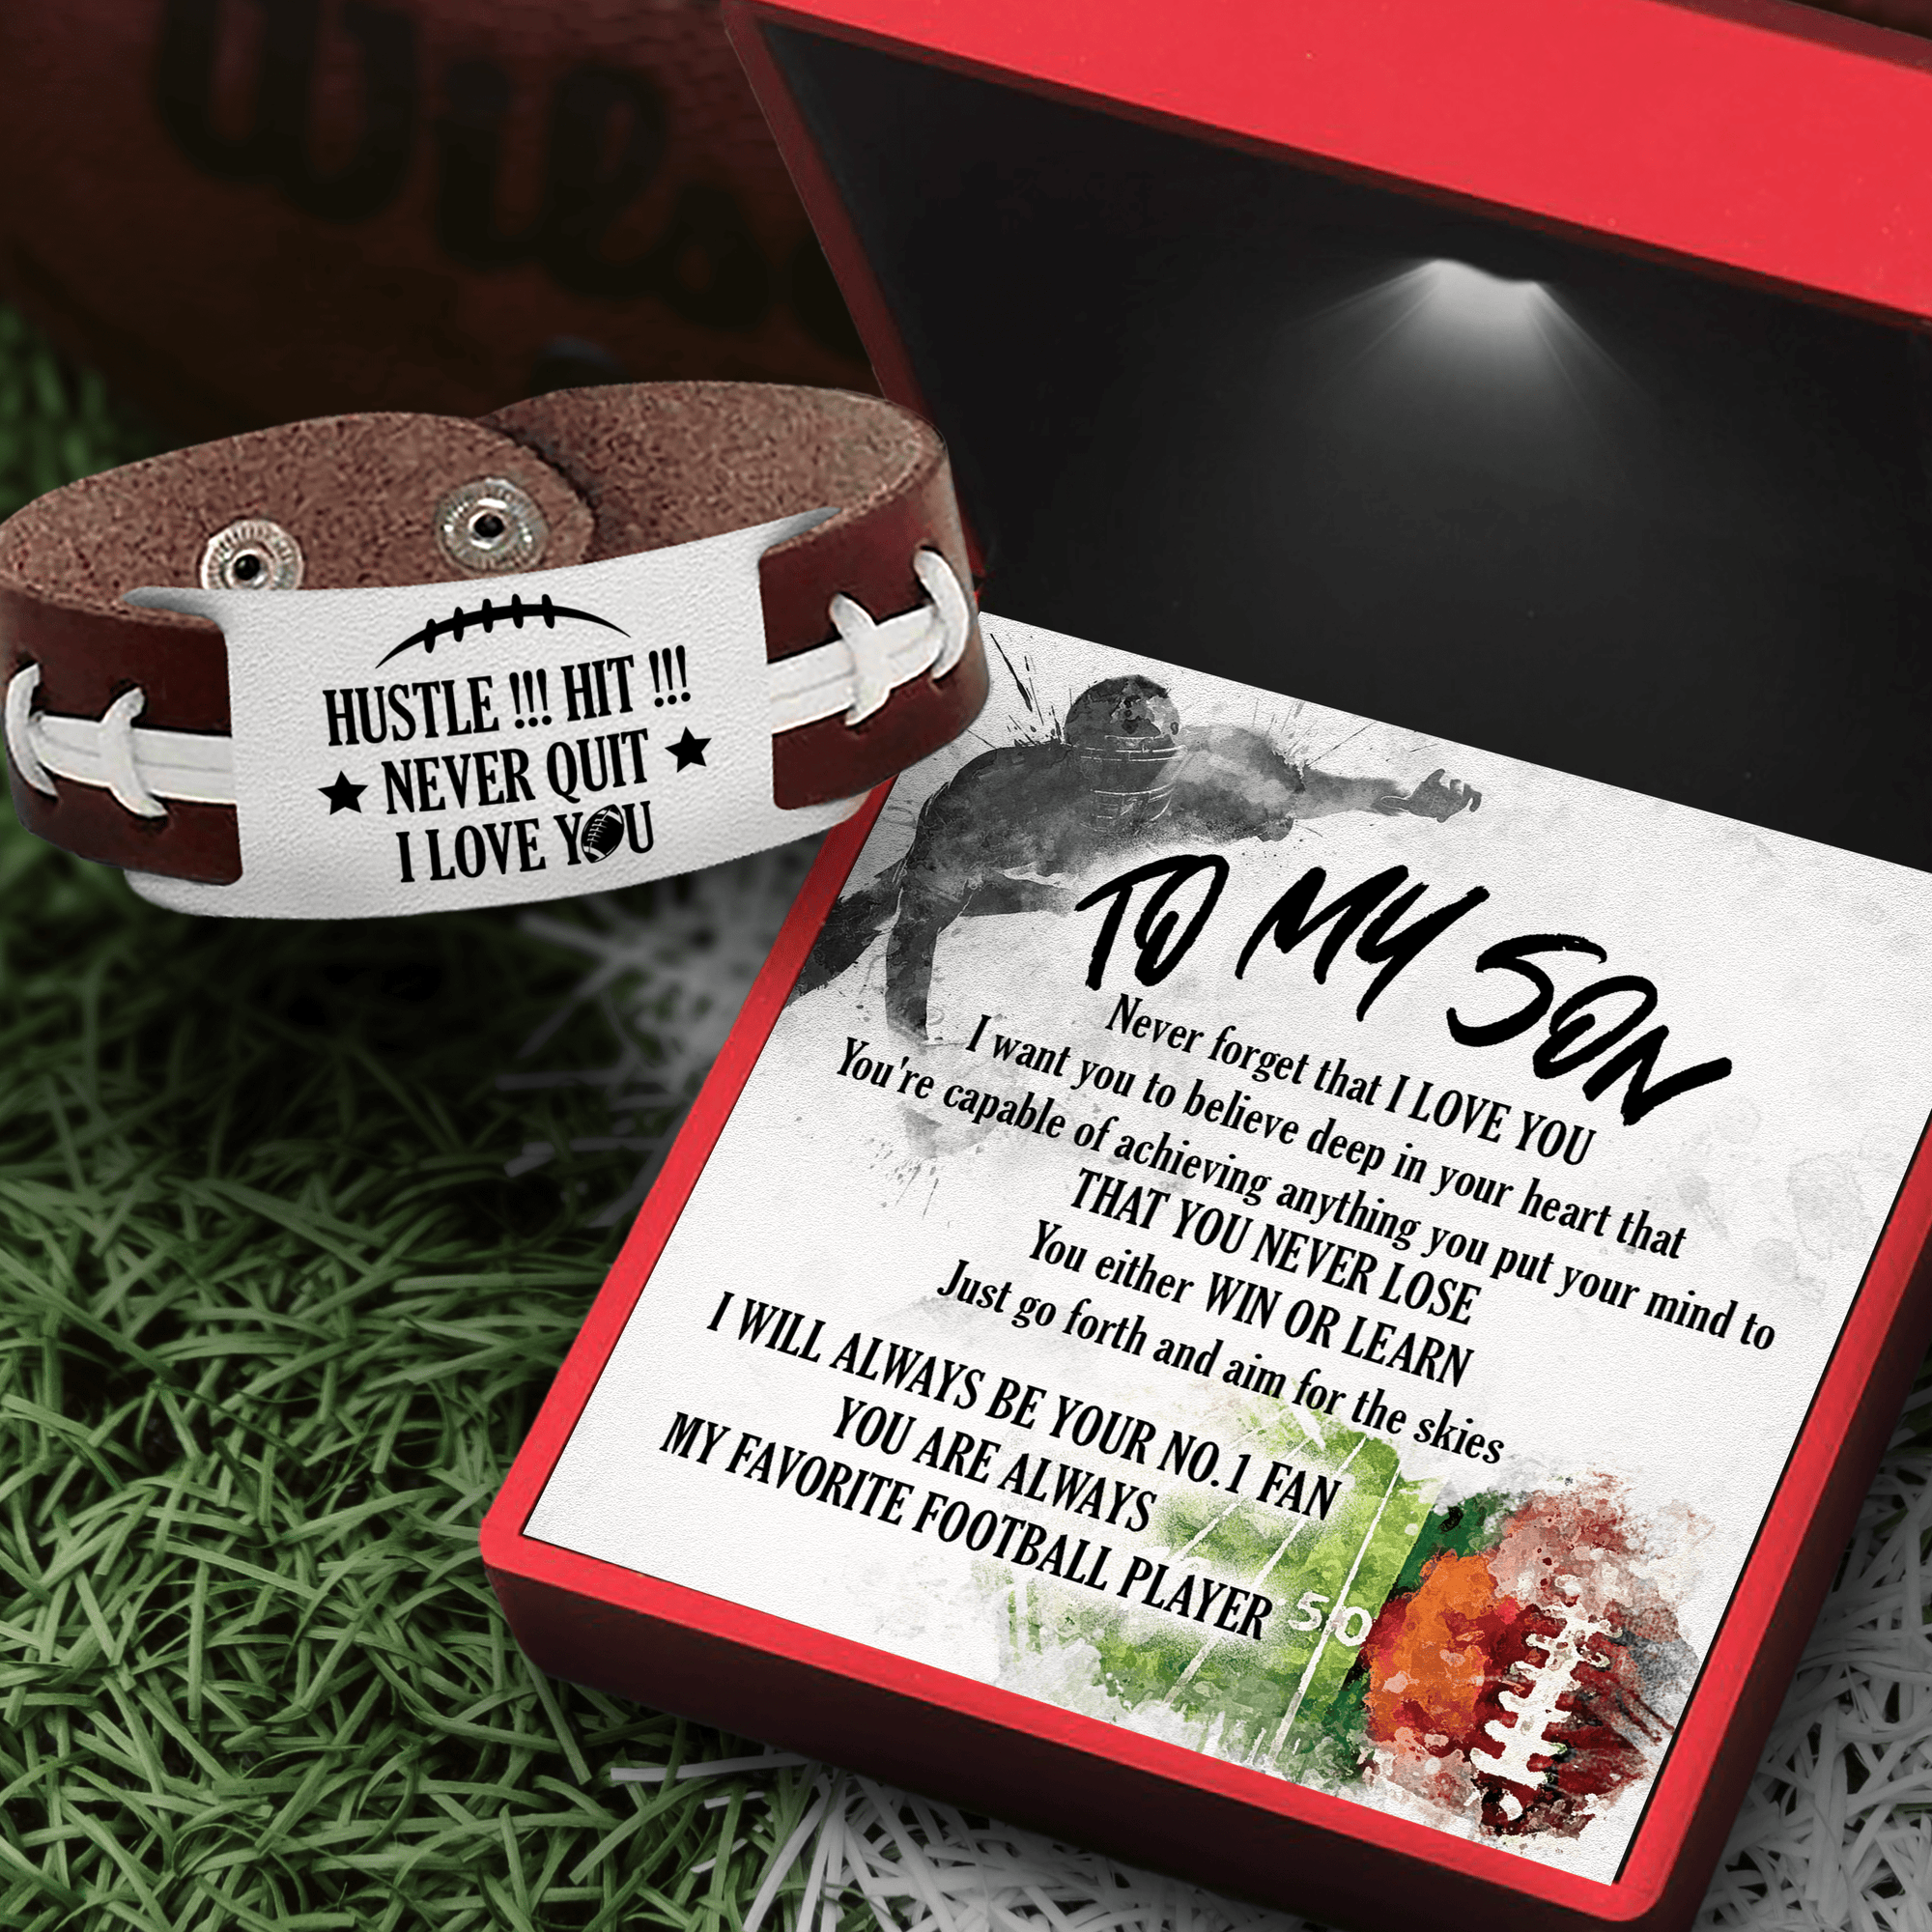 Football Bracelet - American Football - To My Son - Just Go Forth And Aim For The Skies - Gbzo16018